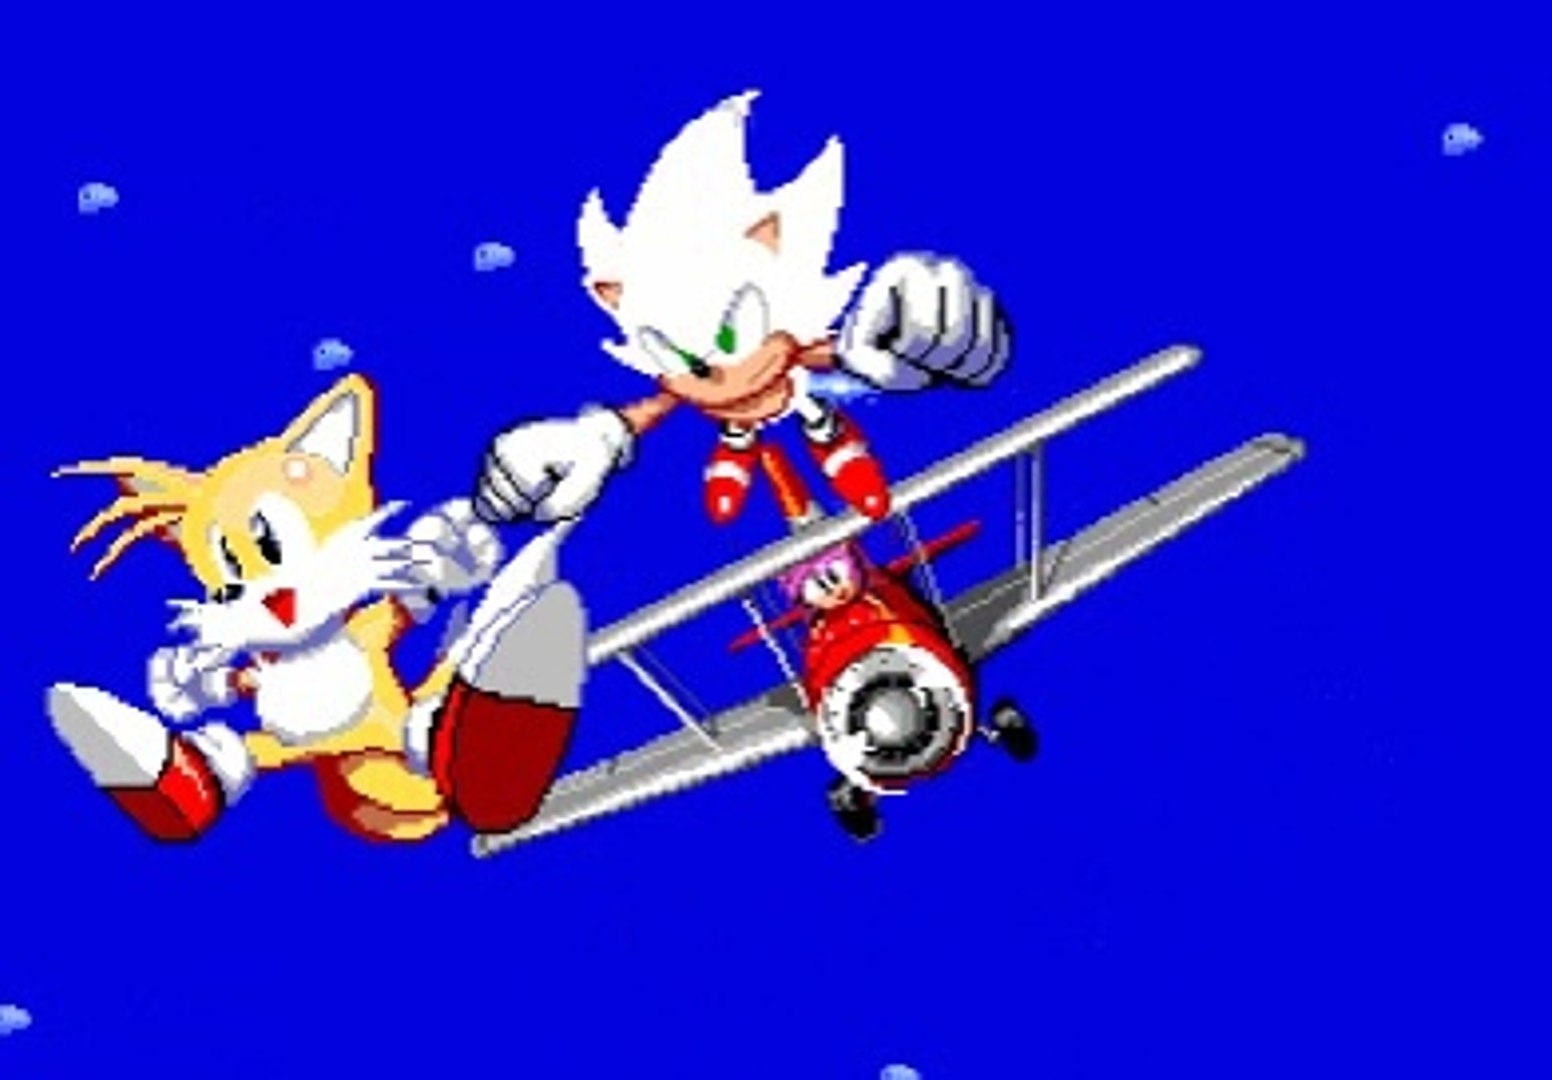 Super Classic Sonic and Tails  Classic sonic, Sonic, Classic